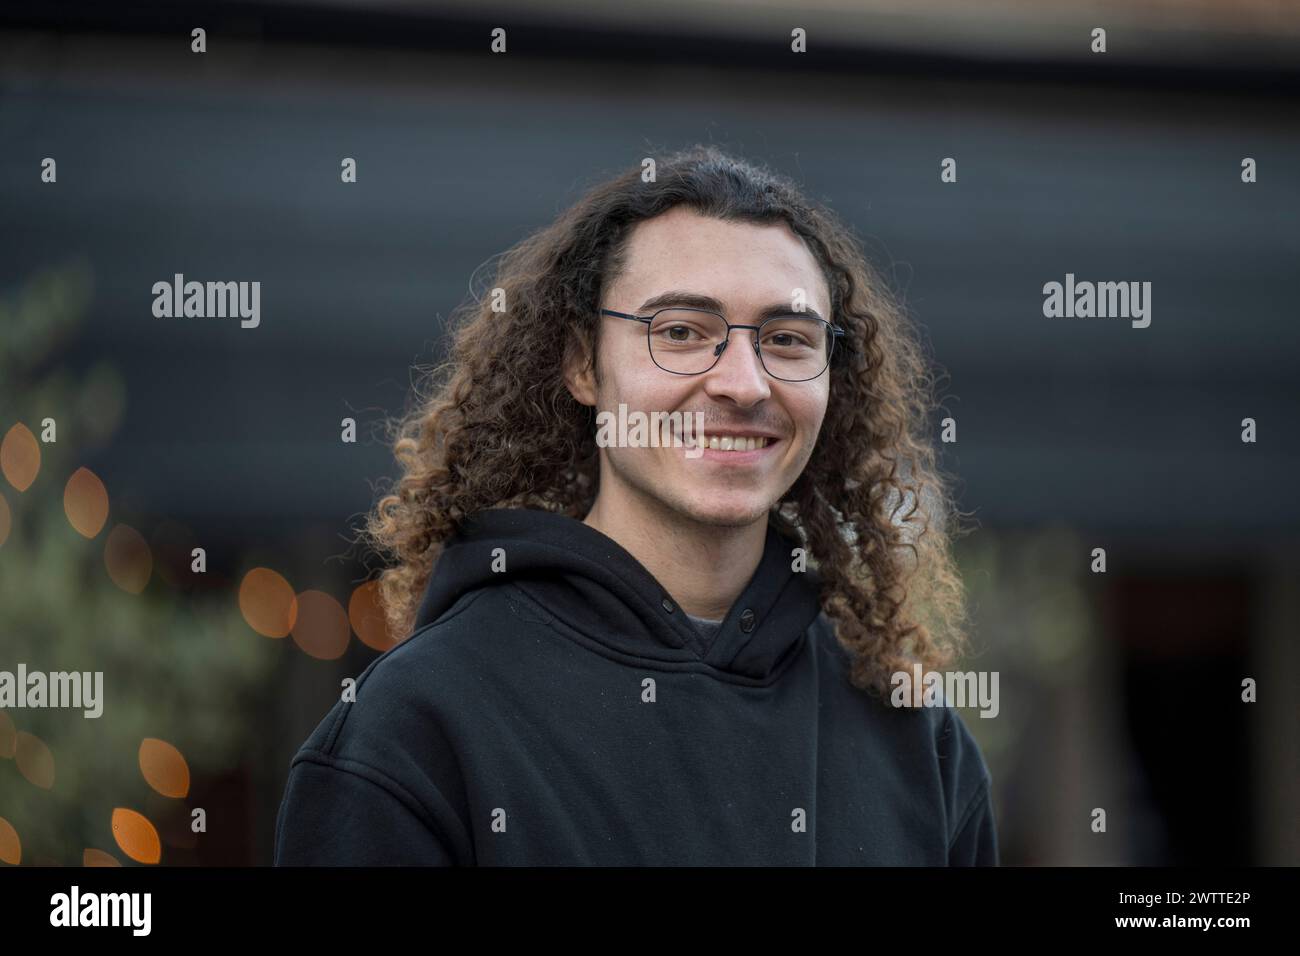 Smiling young person with curly hair enjoying an outdoor moment Stock Photo